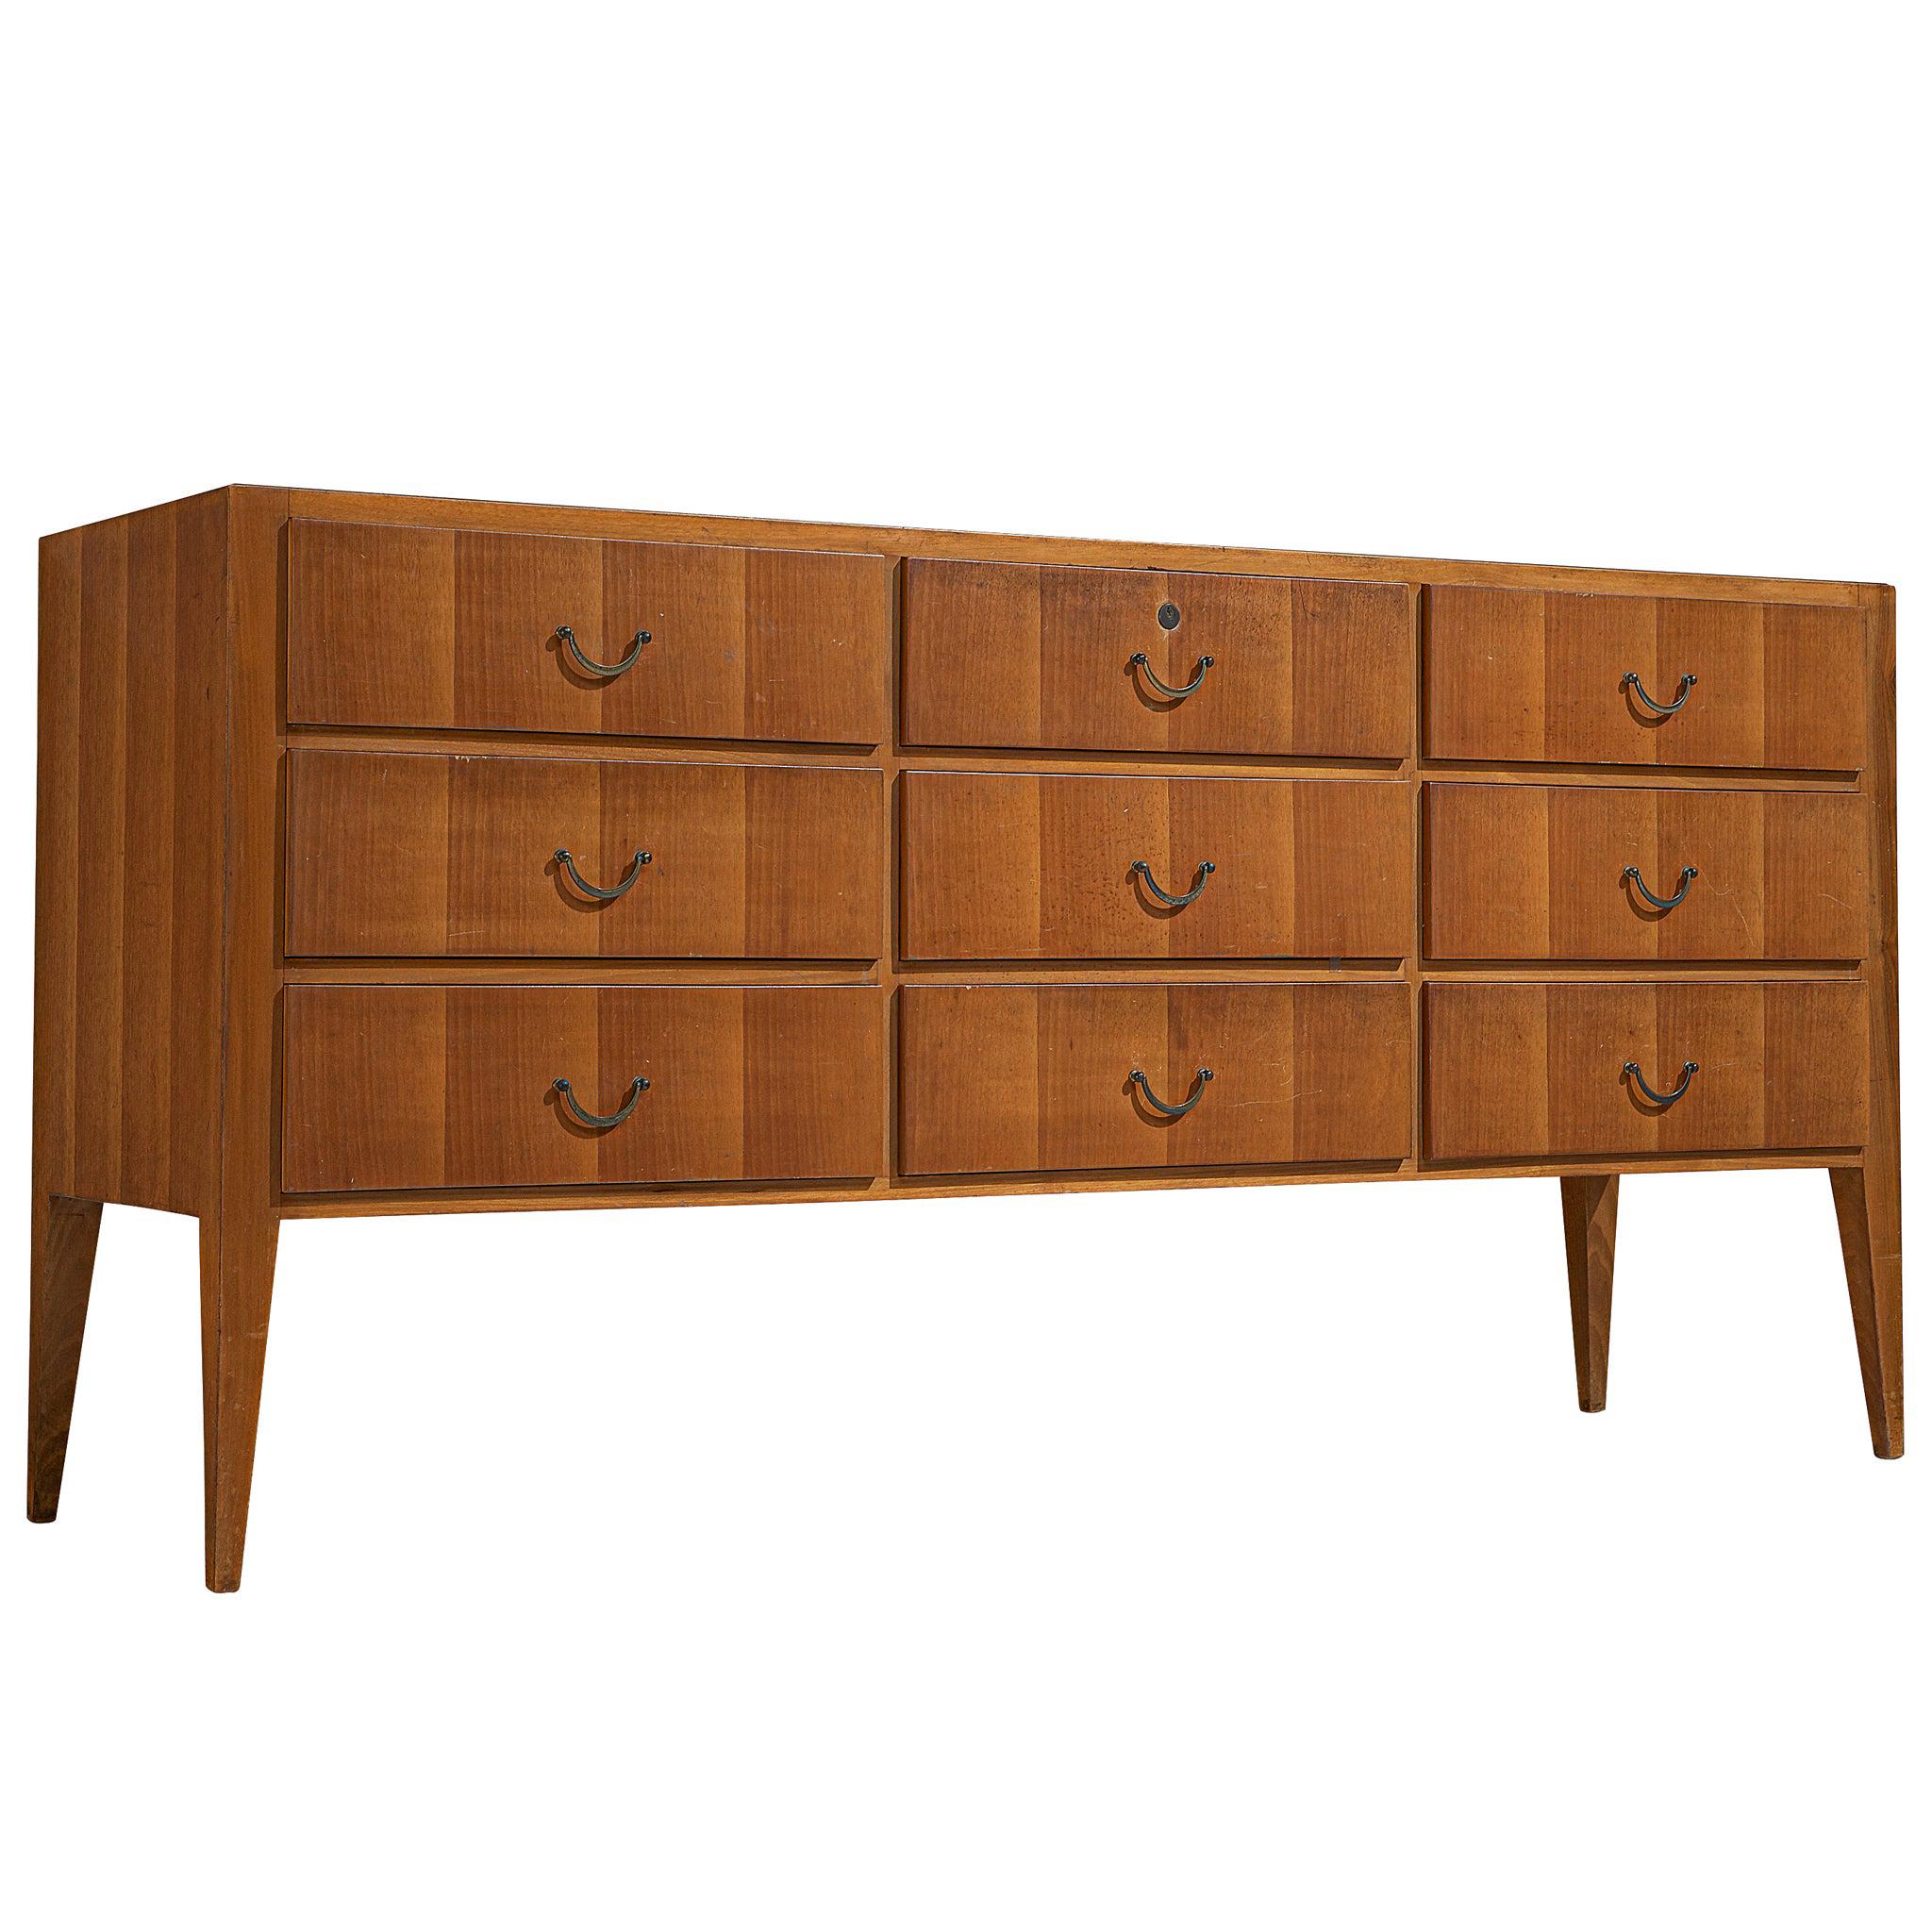 Cabinet with Drawers in Walnut and Brass, Italy, 1950s